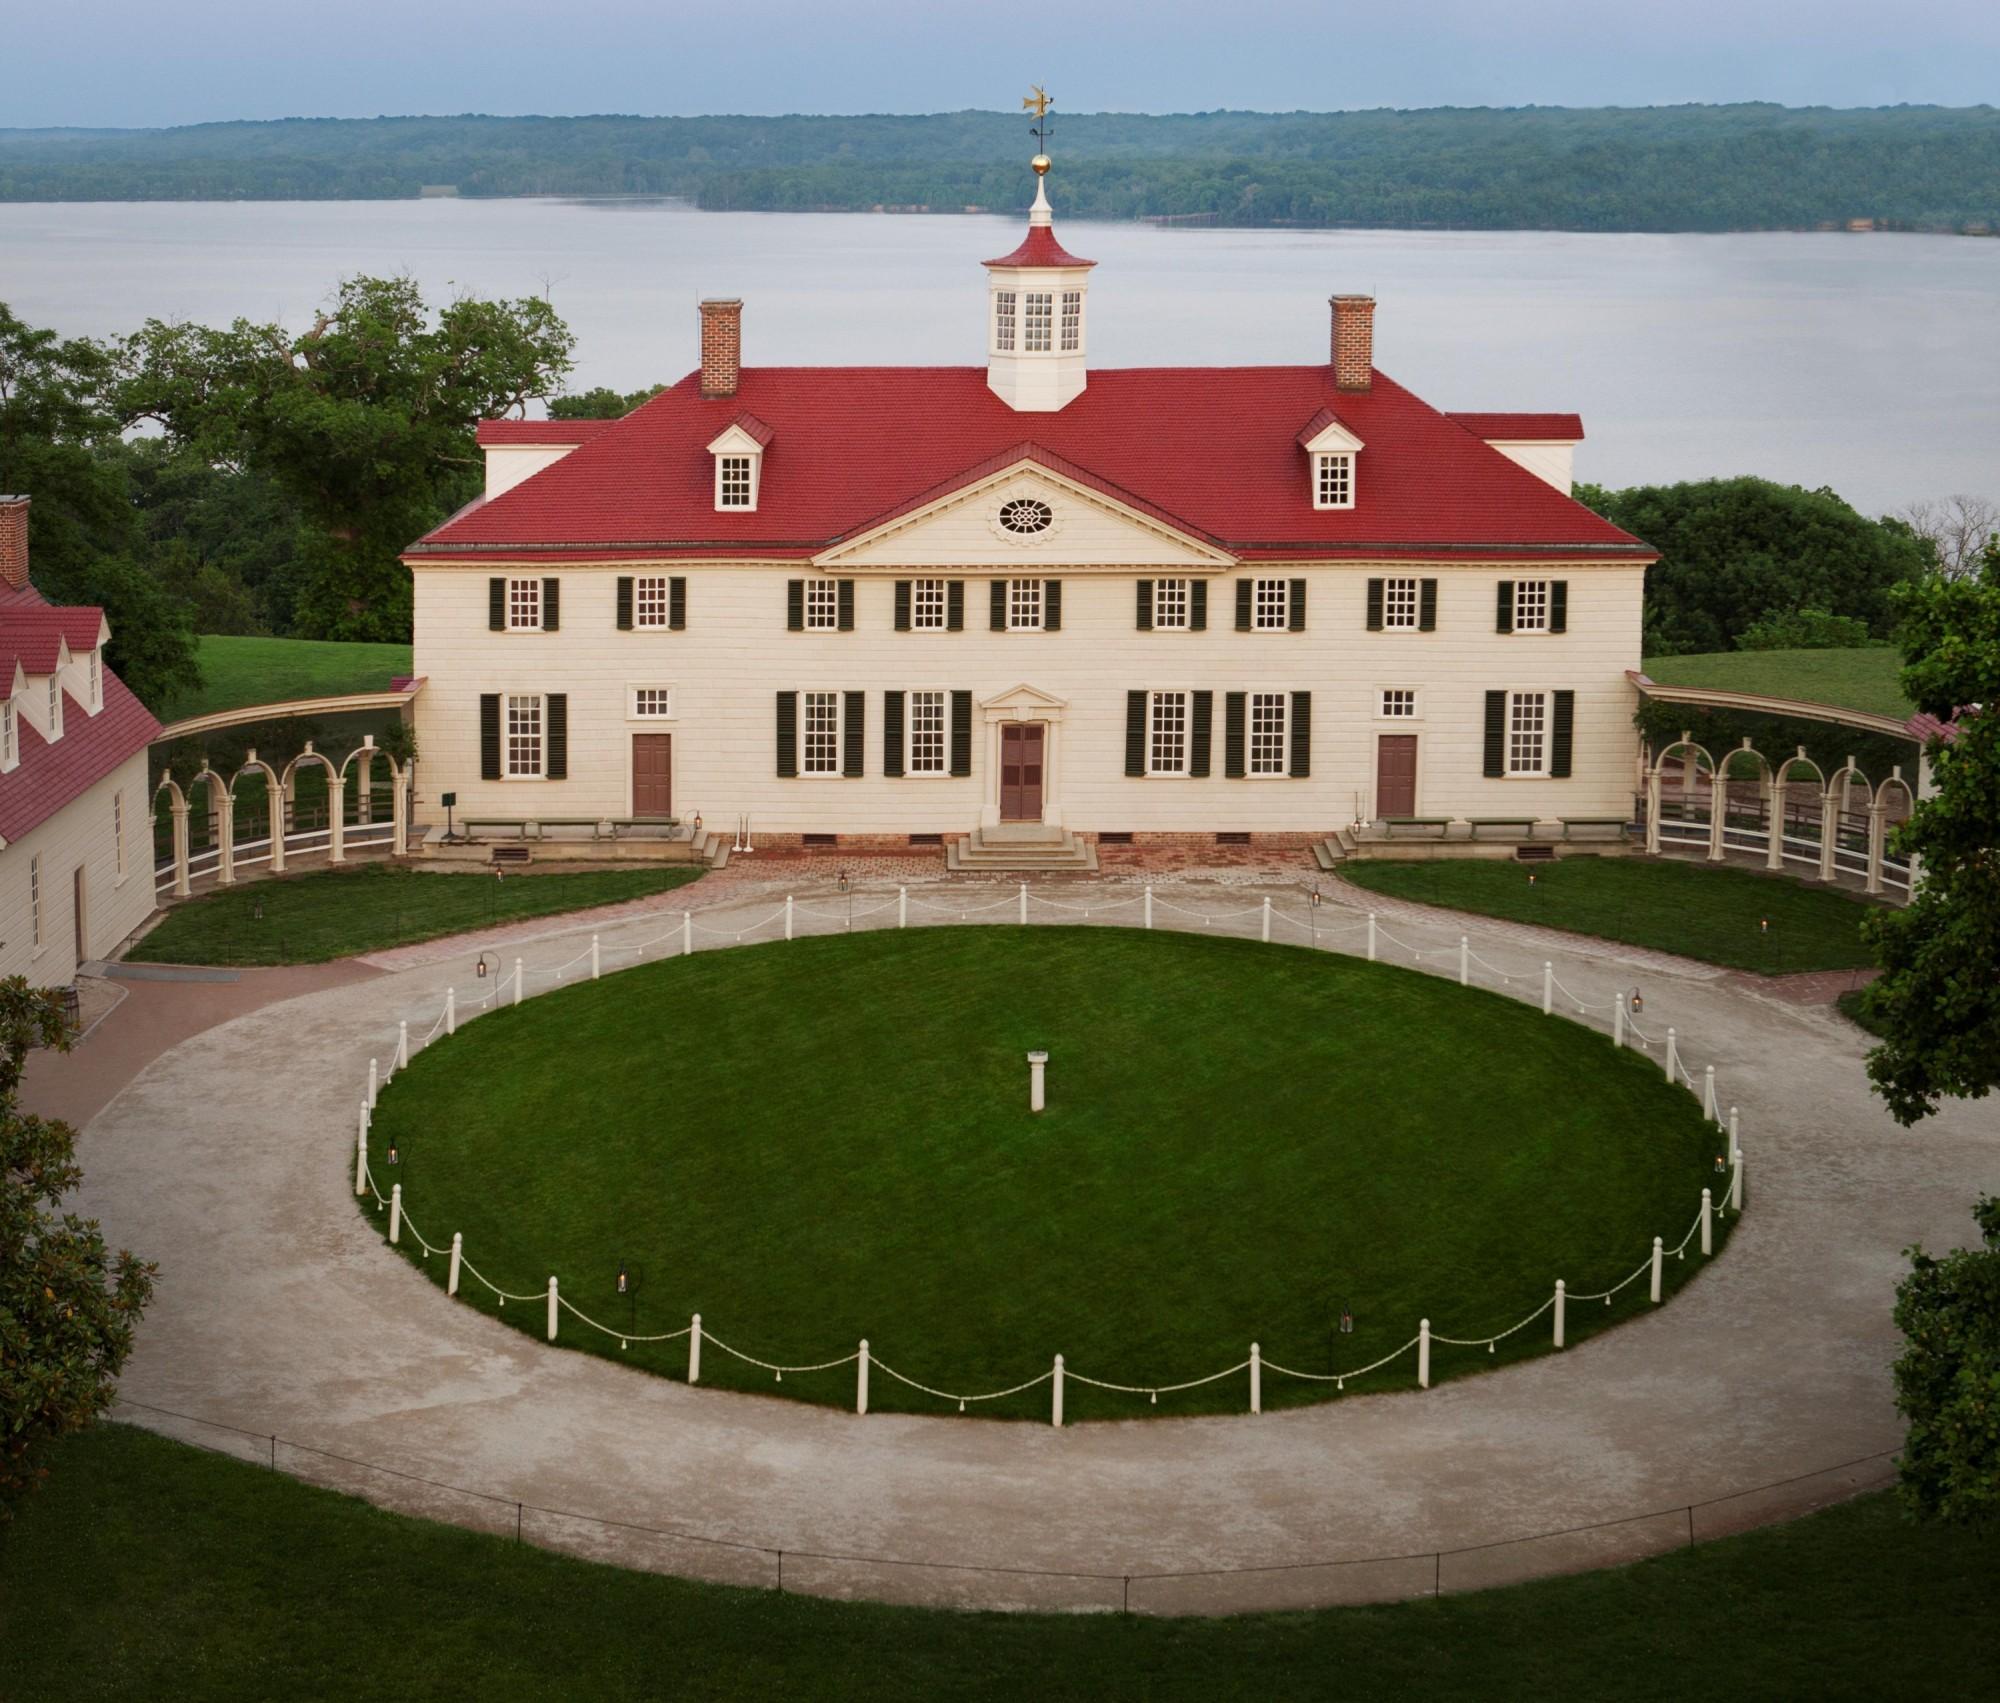 Cover image of this place George Washington's Mount Vernon Estate, Museum & Gardens